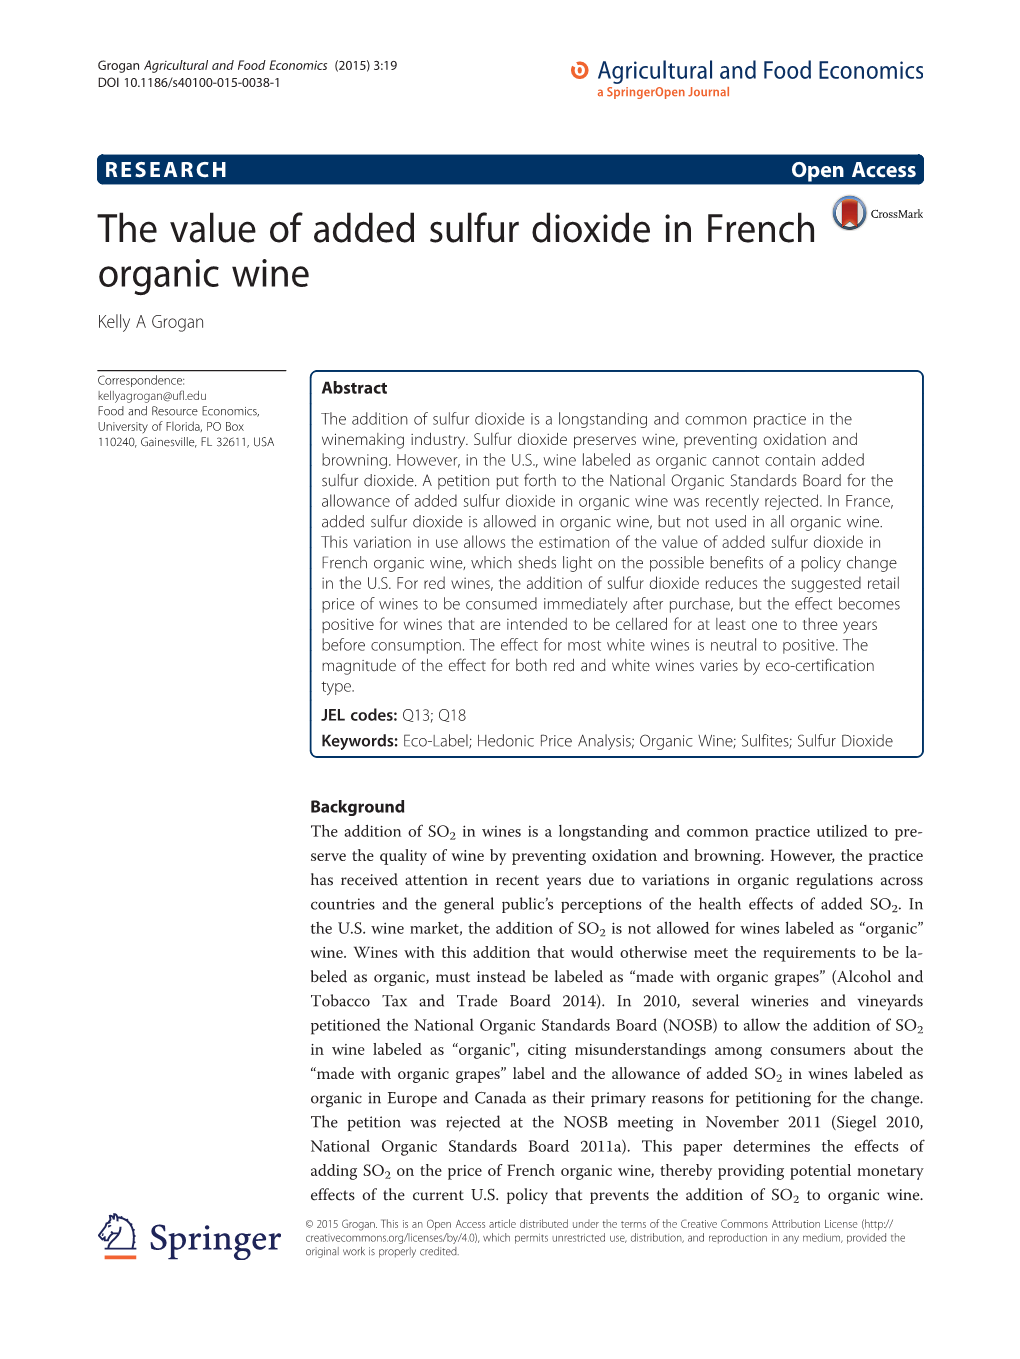 The Value of Added Sulfur Dioxide in French Organic Wine Kelly a Grogan